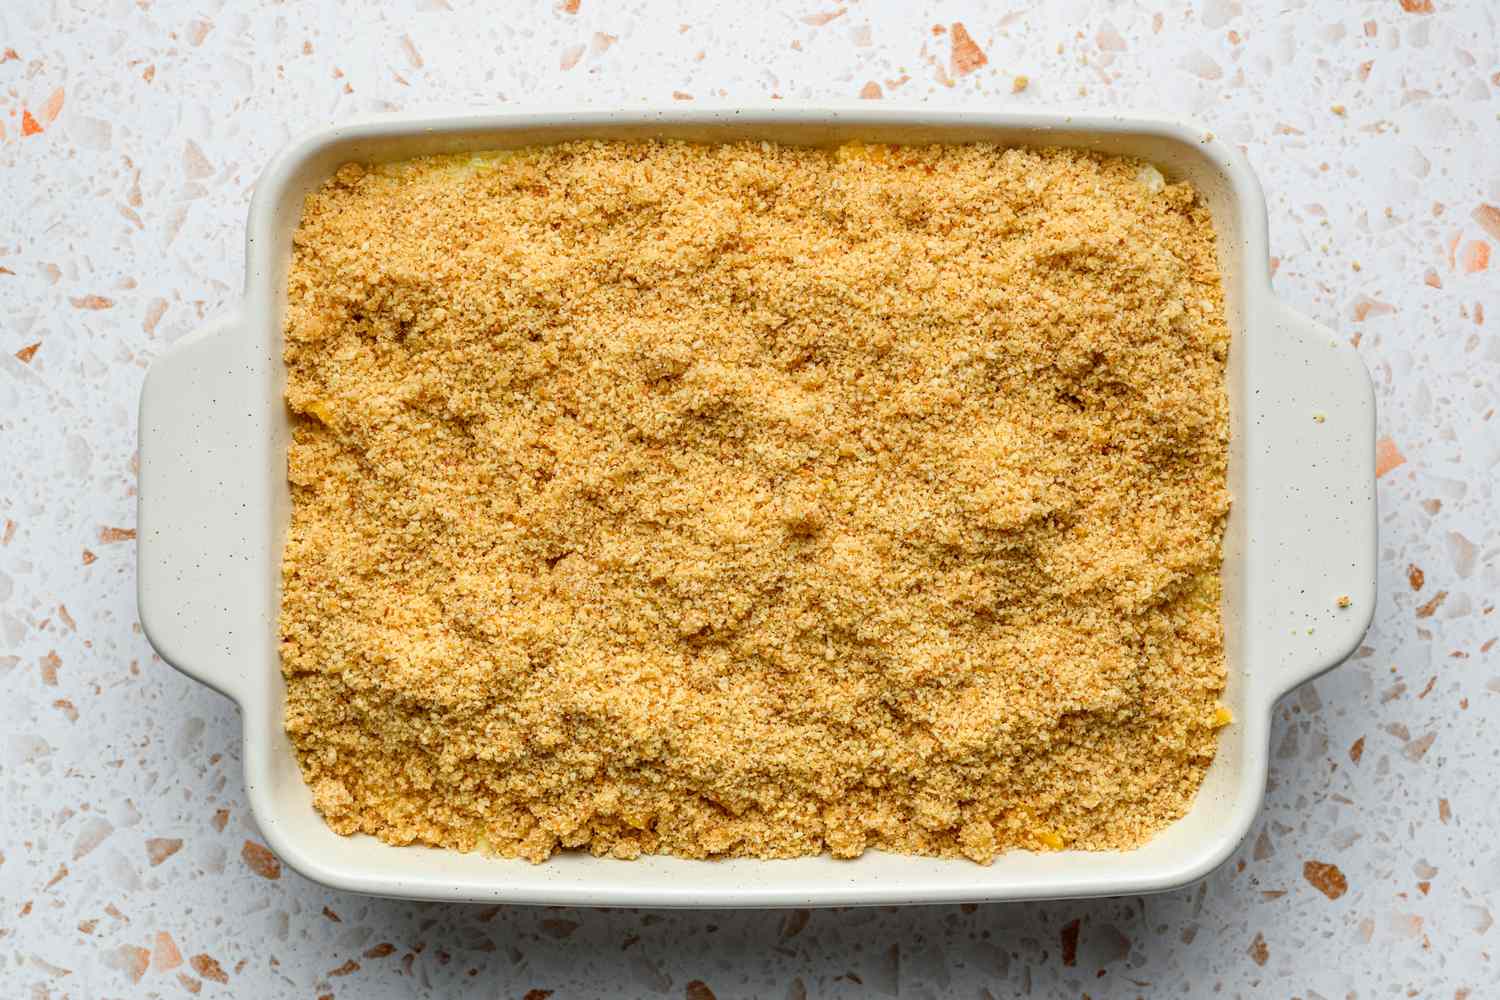 An unbaked yellow squash casserole in a baking dish, topped with breadcrumbs